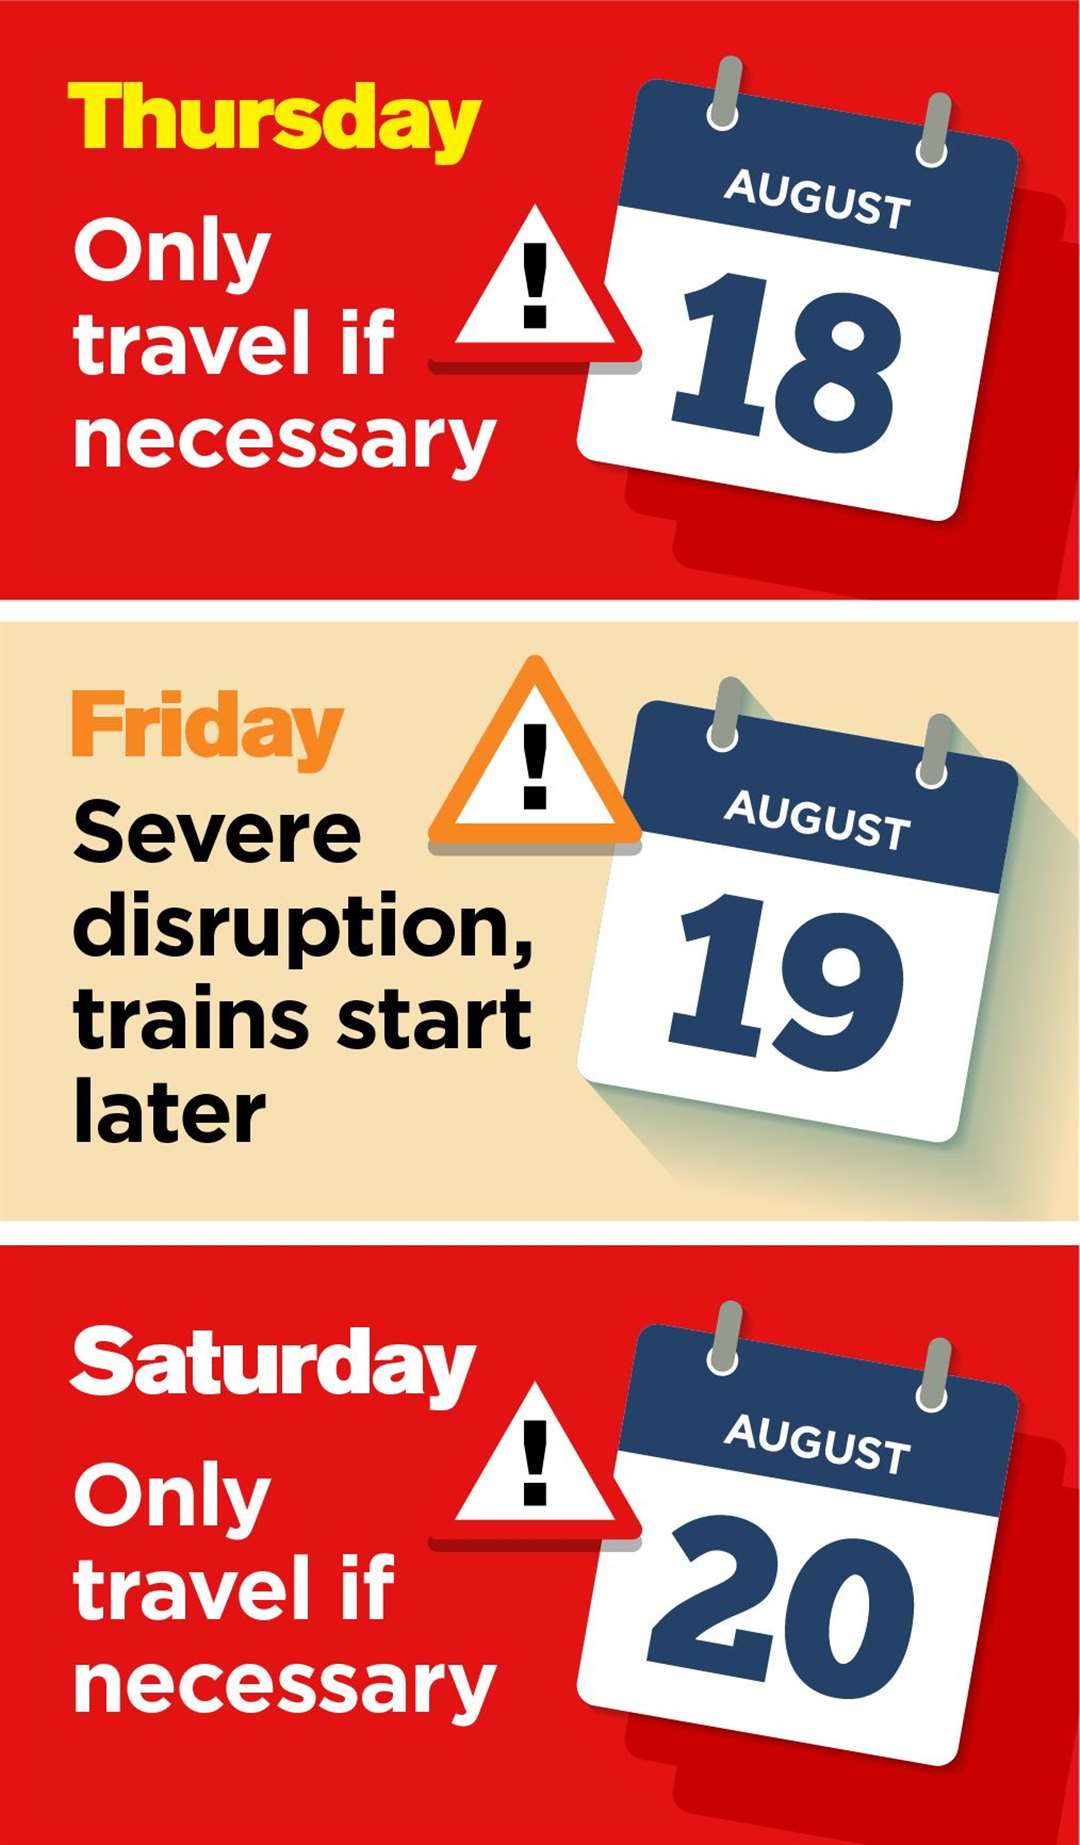 Rail strikes will take place on Thursday, August 18, and Saturday, August 20